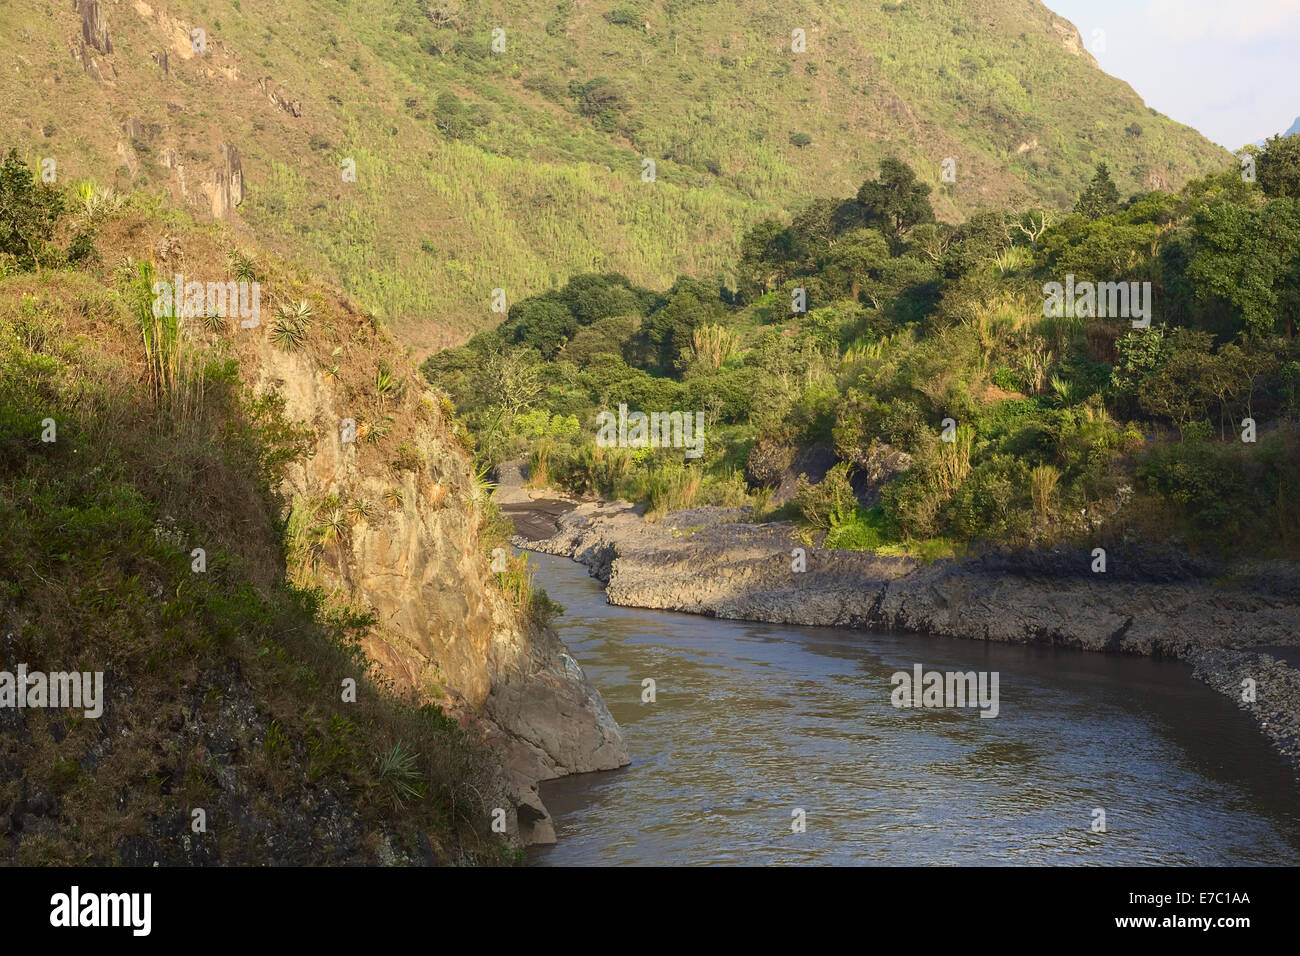 The Pastaza River in Ecuador, between the towns of Banos and Puyo in Tungurahua Province Stock Photo